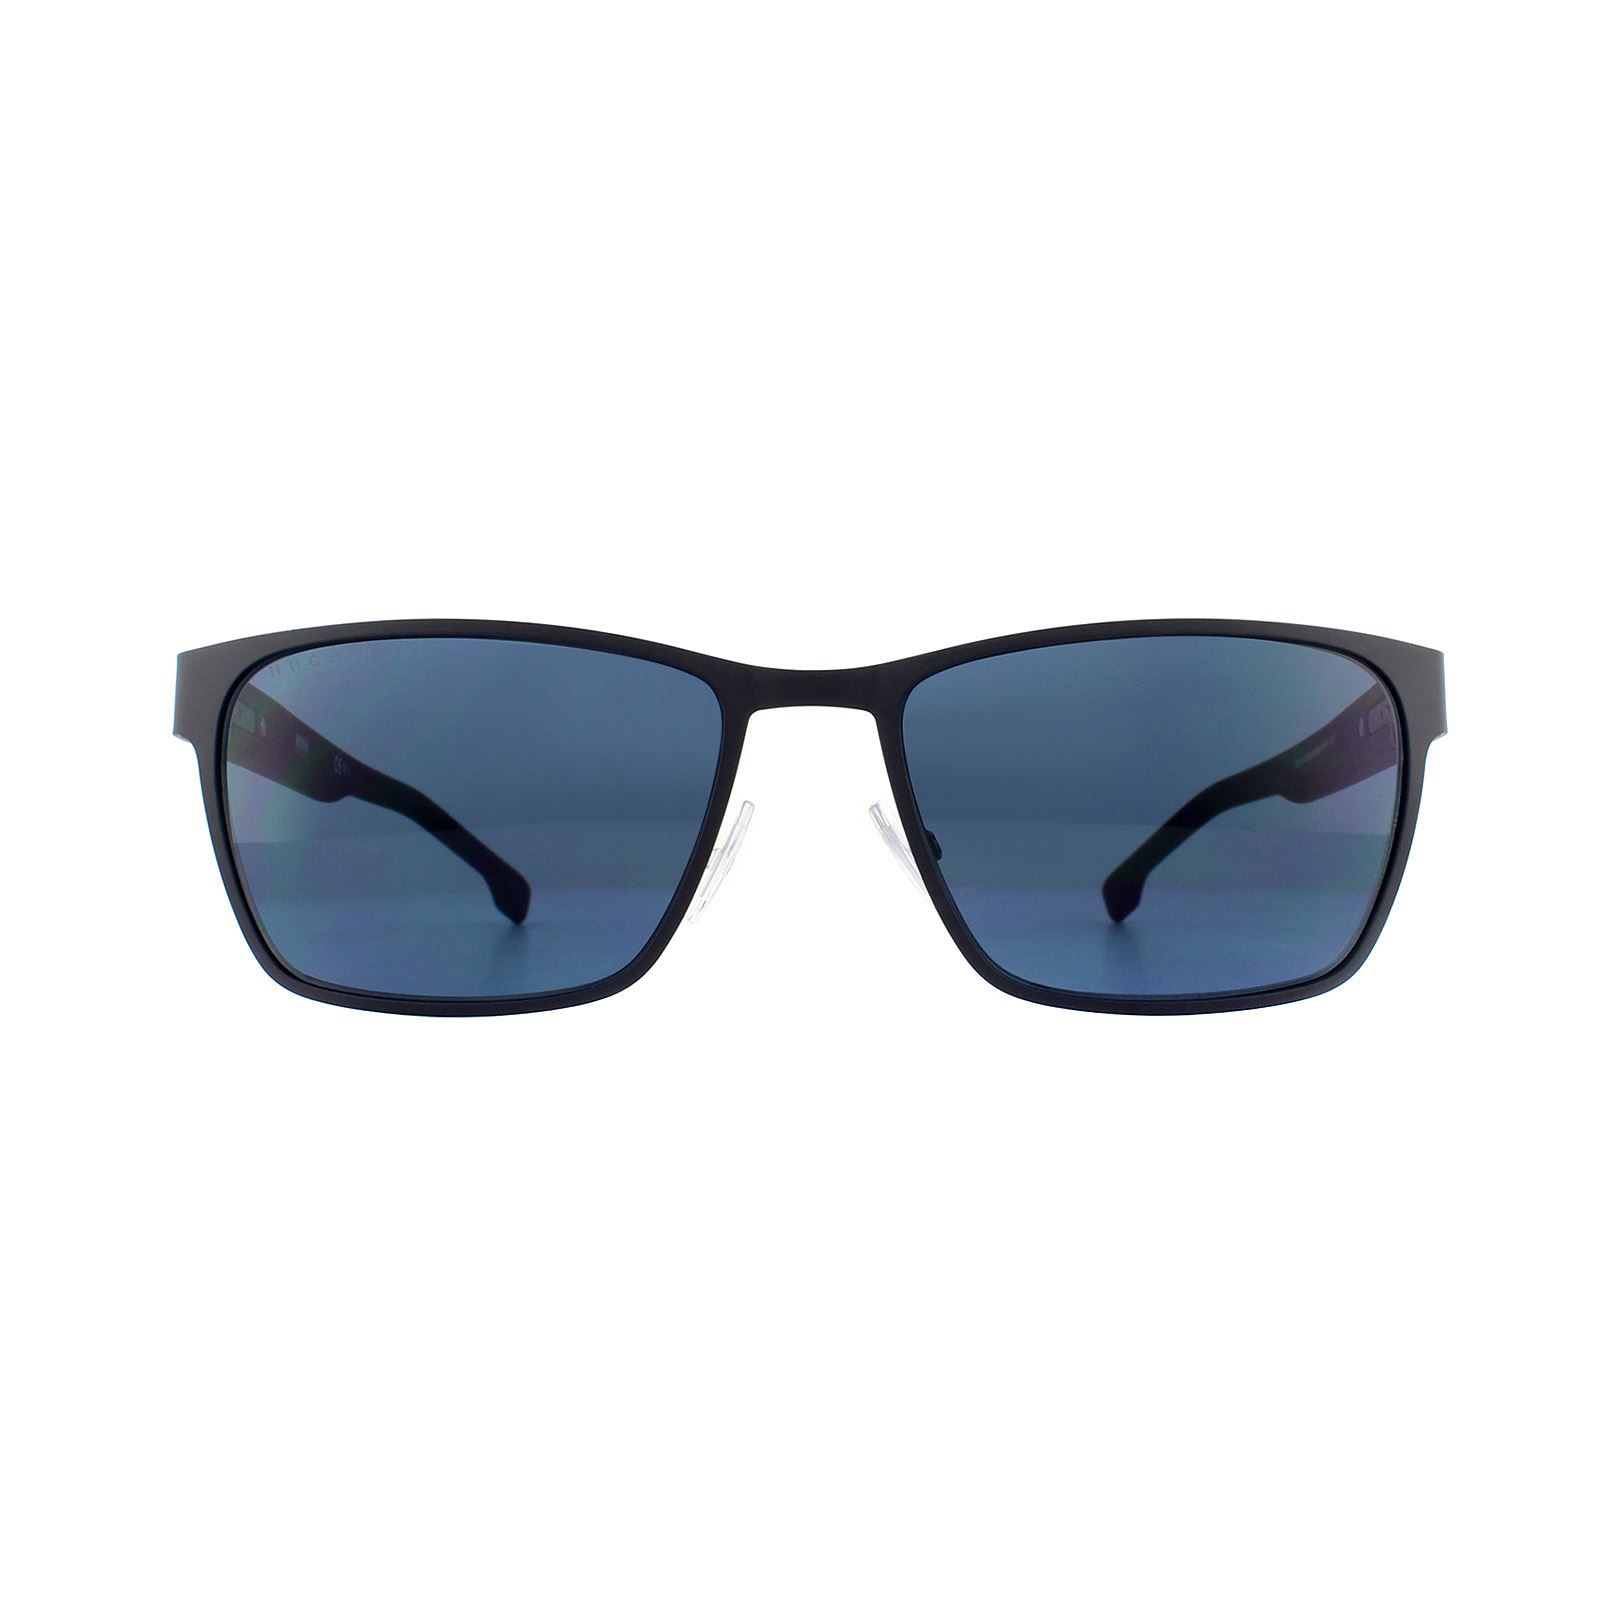 Hugo Sunglasses 1038/S RIW KU Matt Grey Blue Avio are a classy mix of materials with the metal front and acetate temples which feature spring hinges and adjustable nose pads for extra comfort and great fitting.